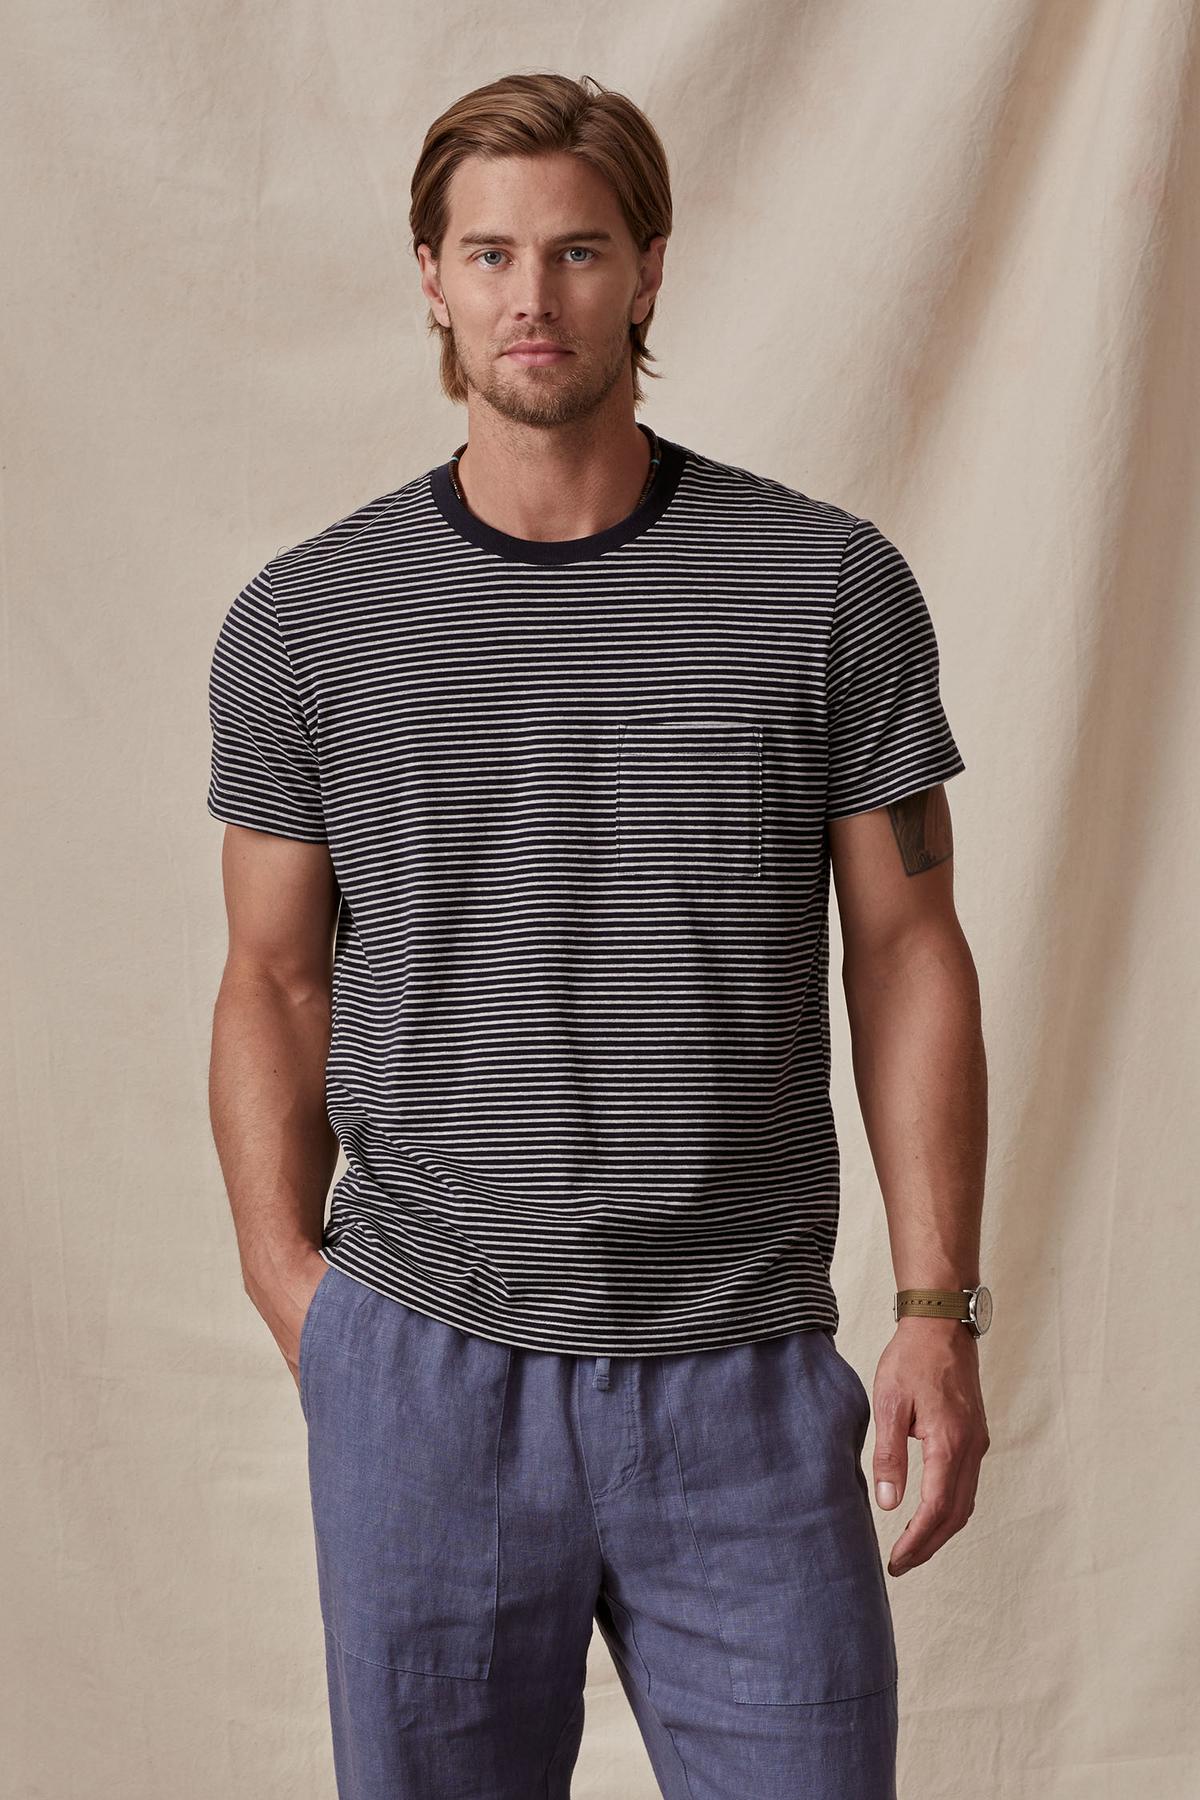   A man in a CHAZZ TEE from Velvet by Graham & Spencer stands against a beige backdrop, looking directly at the camera with a slight smile. 